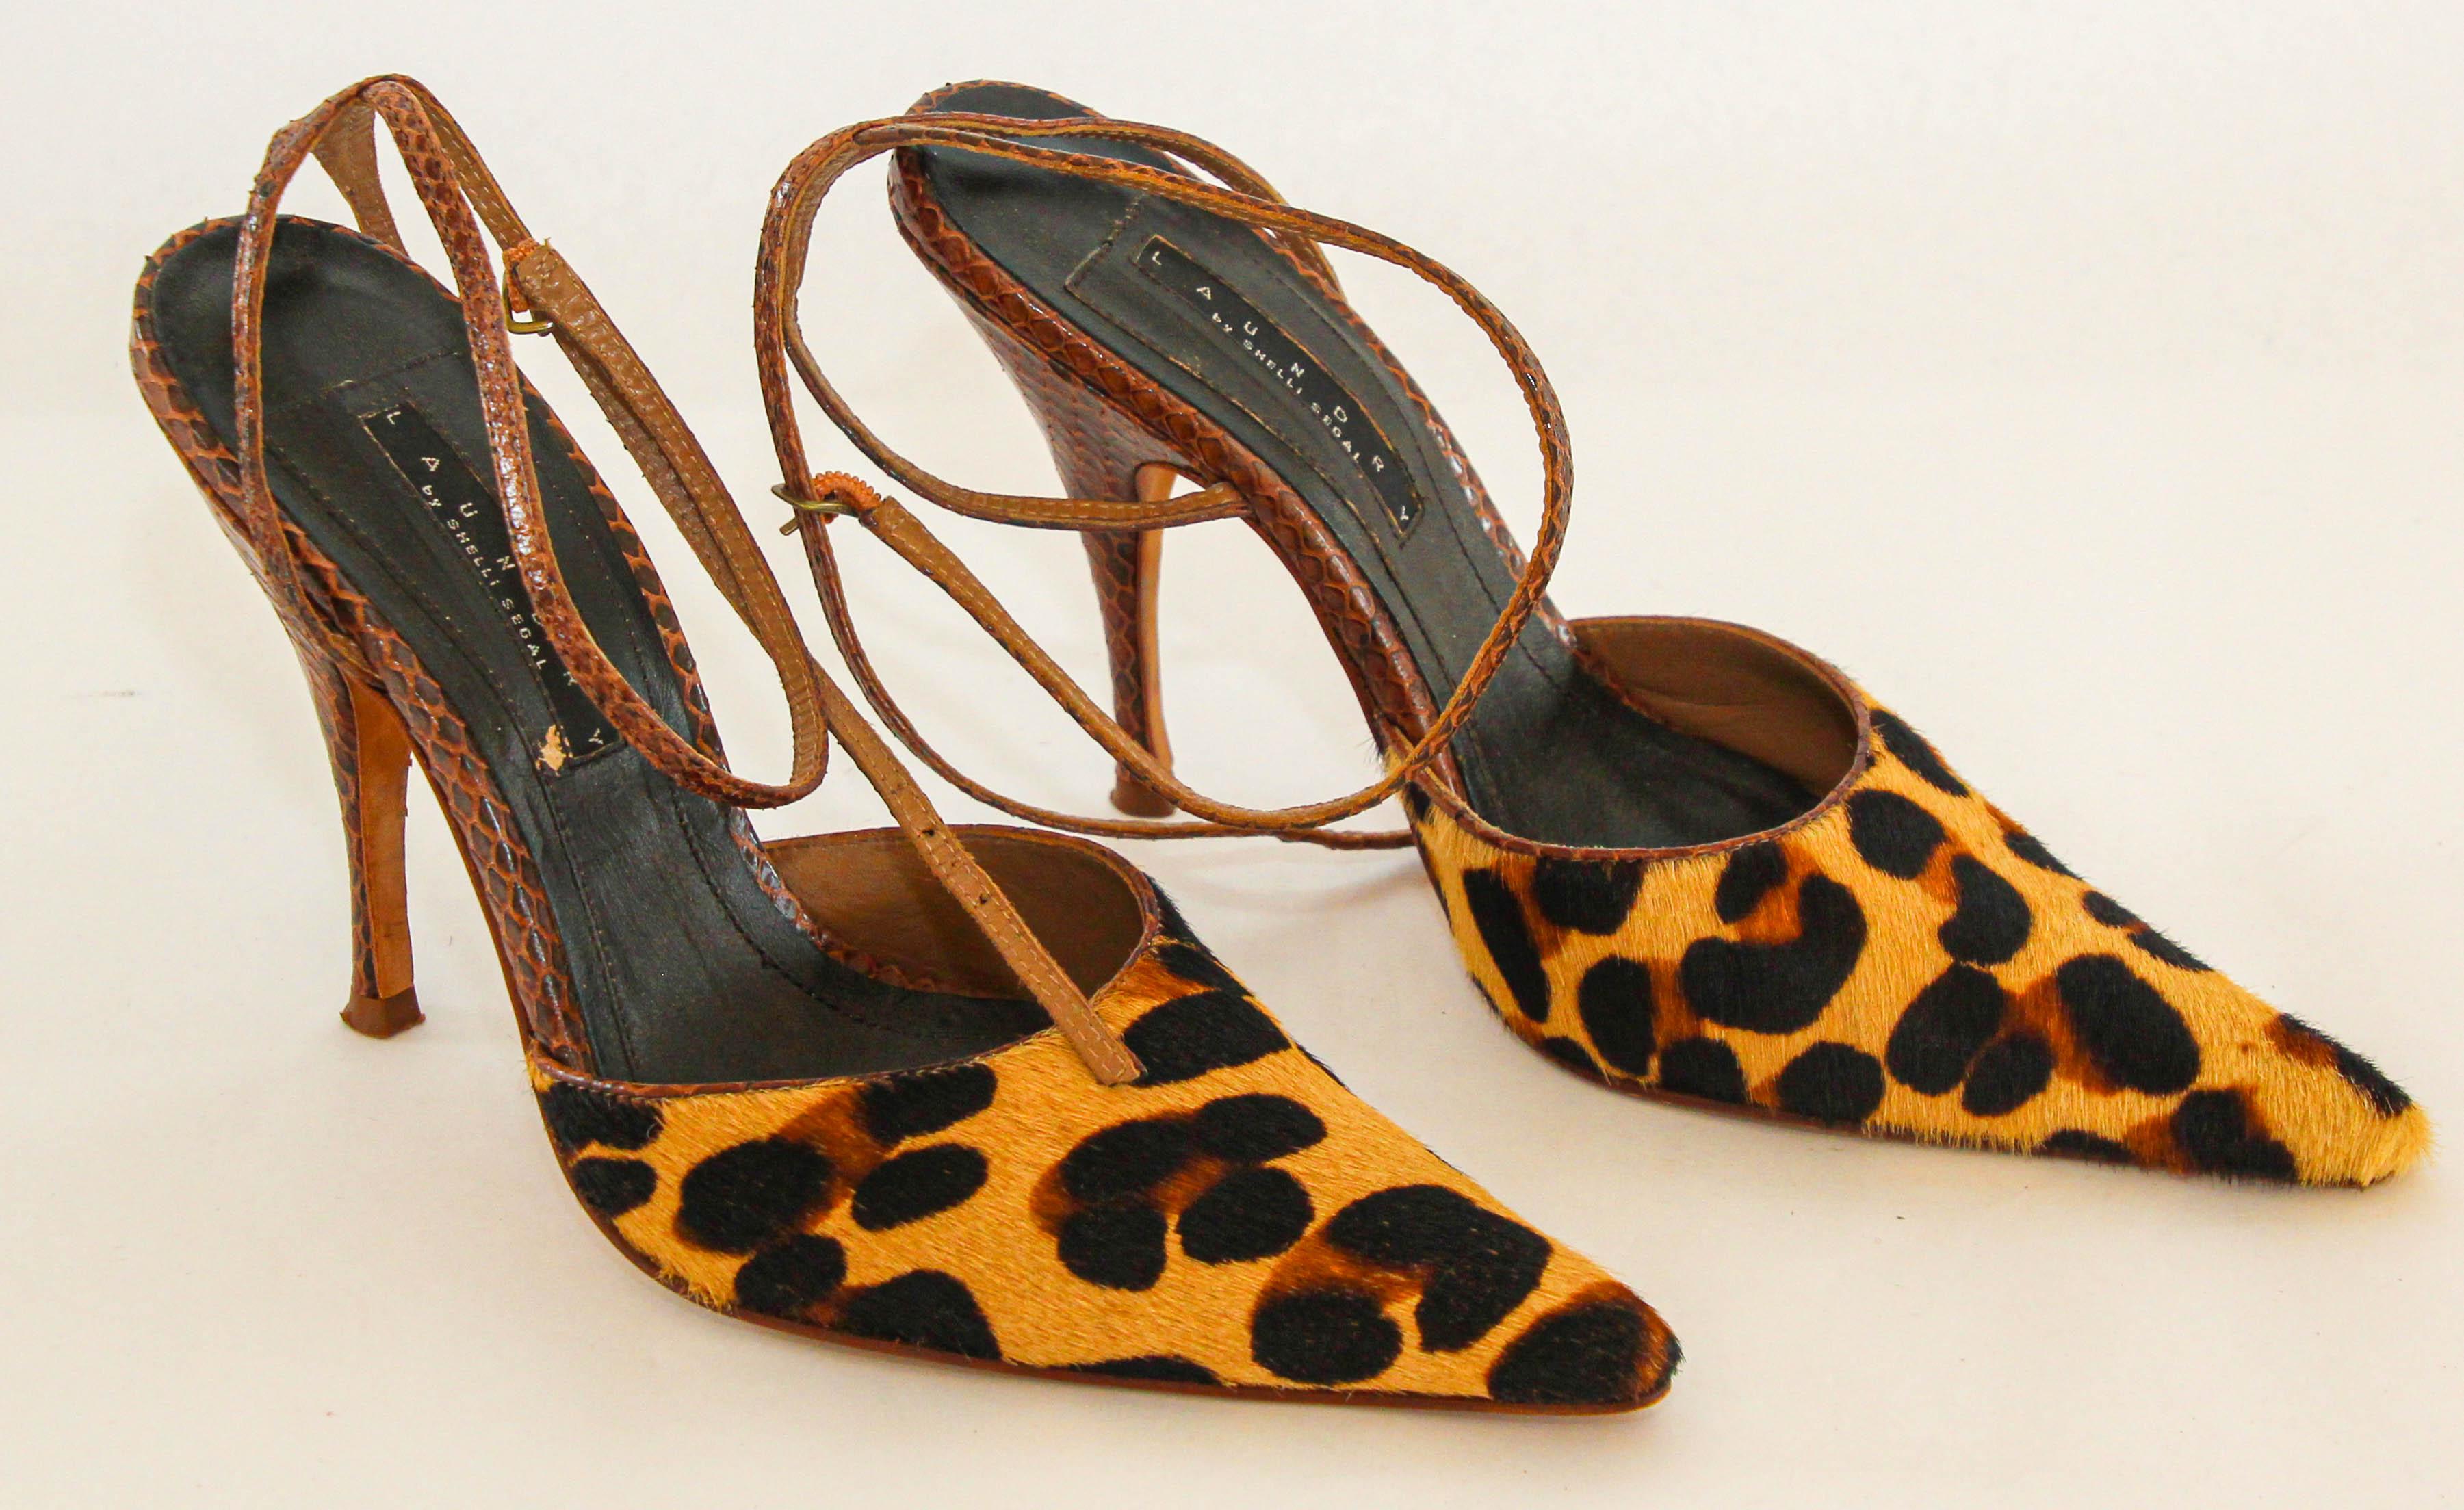 Laundry by Shelli Segal Multicolor Calf Hair and Leather Snake Pattern Slingback Pumps Size US 7.
Leopard-print calf hair slingback pumps
Laundry by Shelli Segal glamourous creation that is both elegant and modern. The Leopard print  pumps will